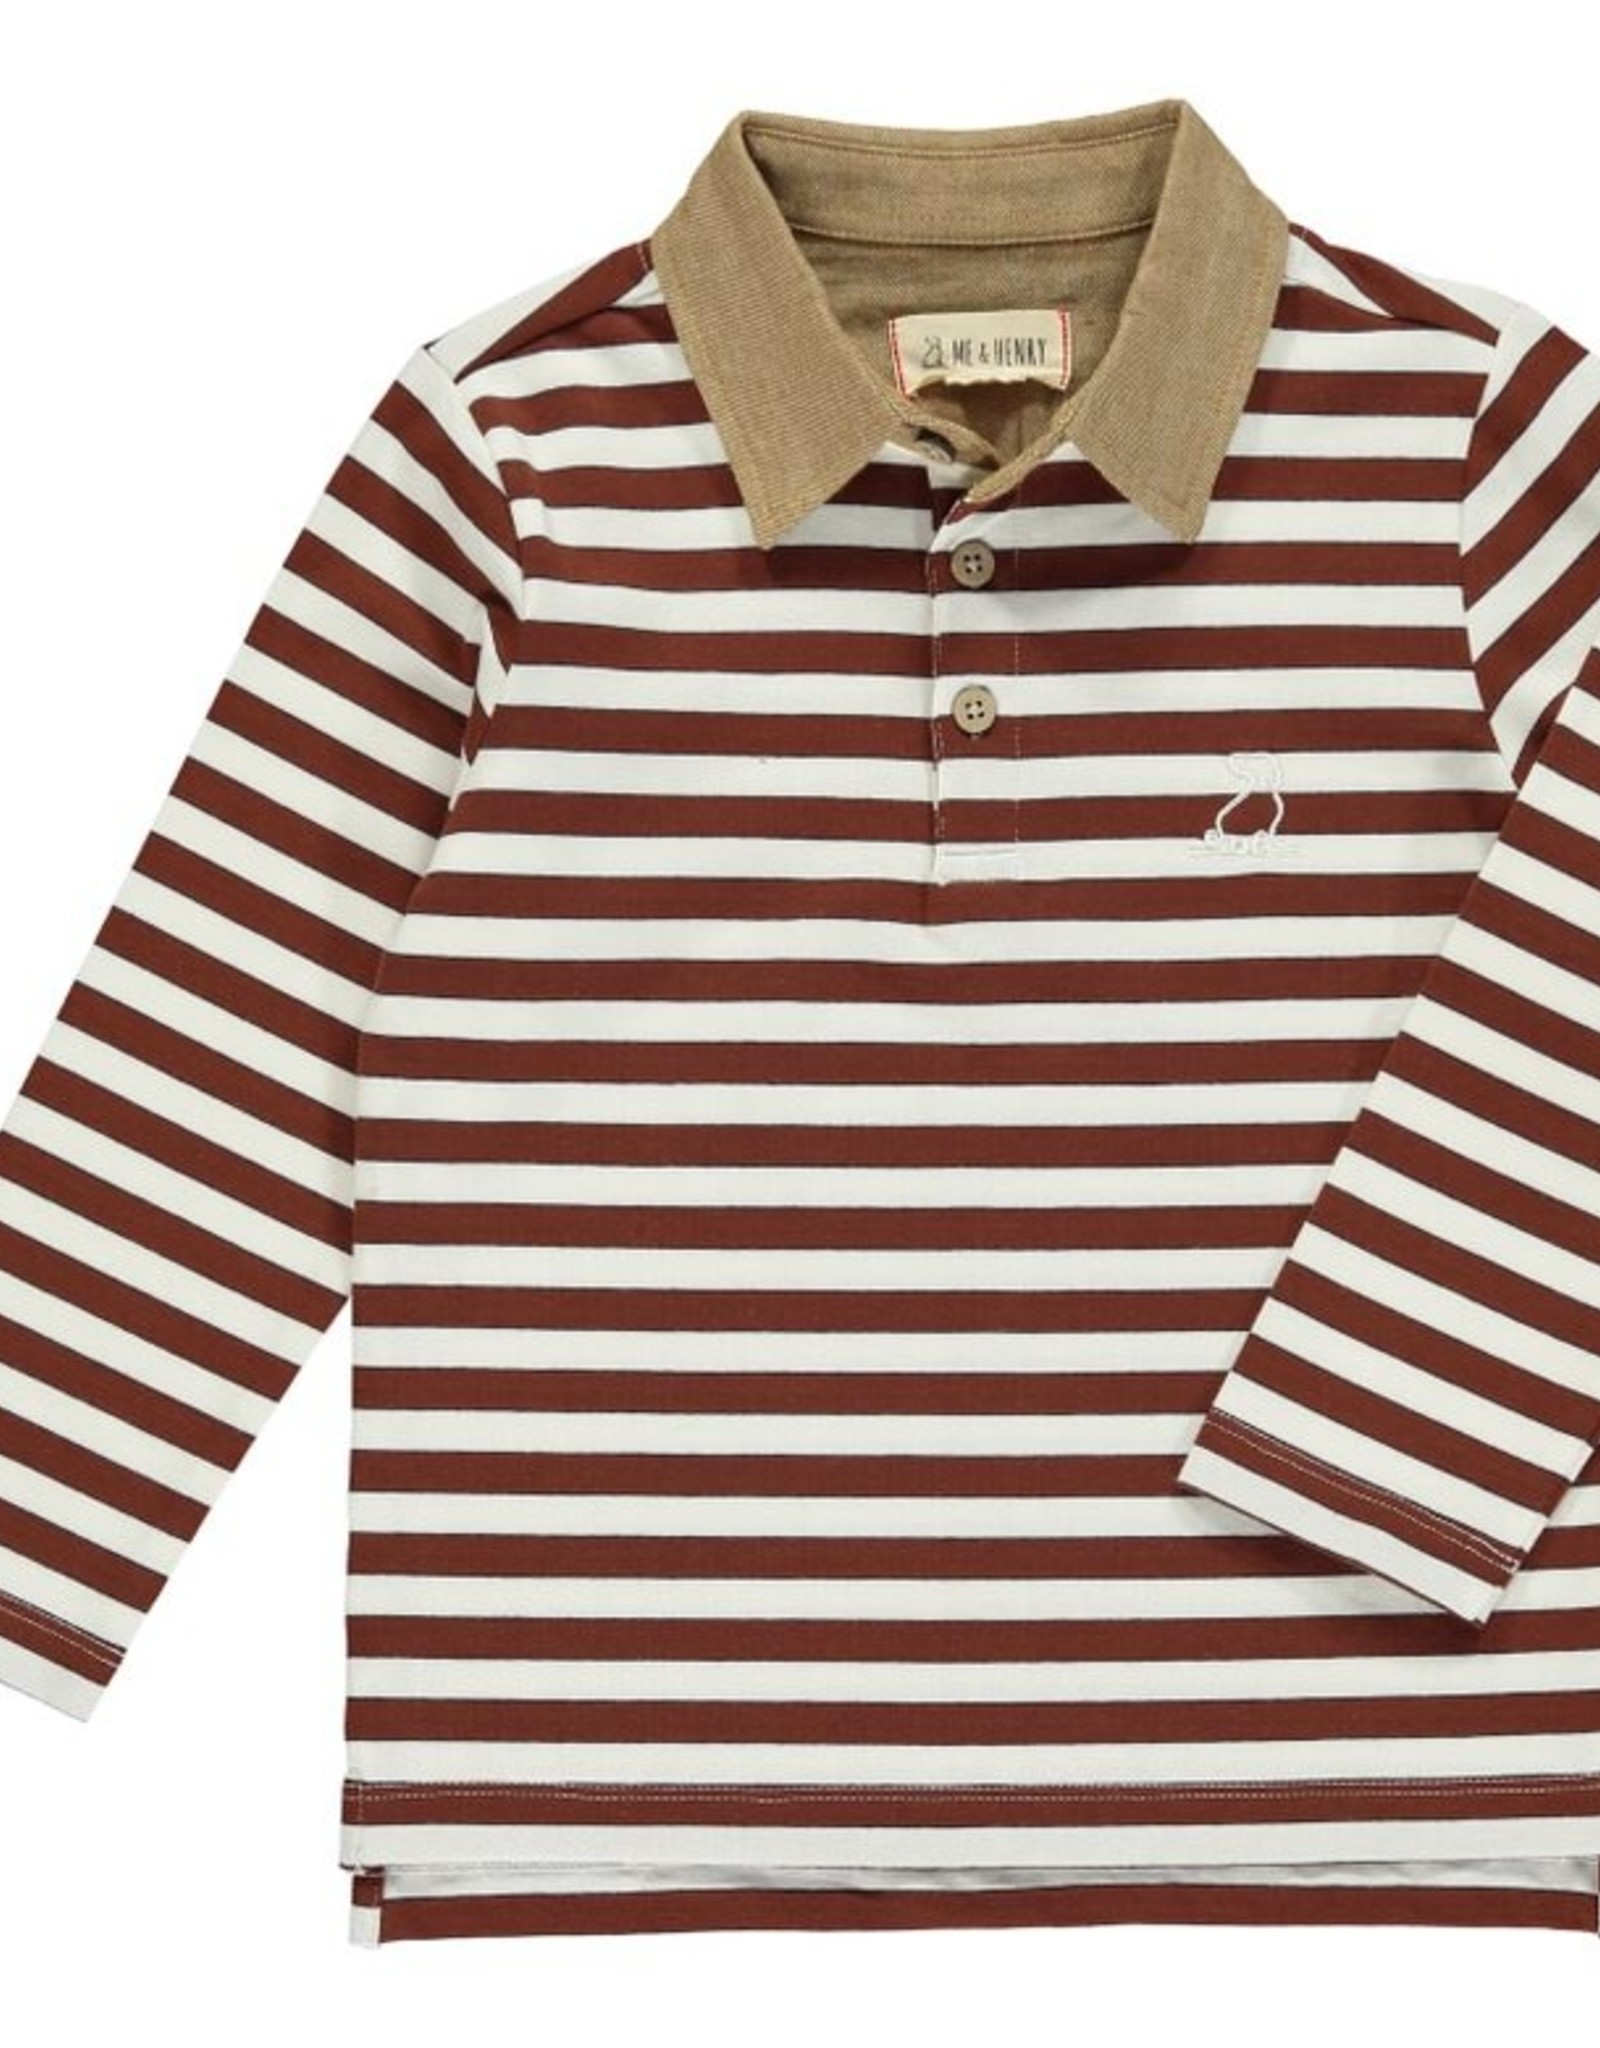 Me & Henry WAVERLY Polo Brown Stripe Lng Sleeve